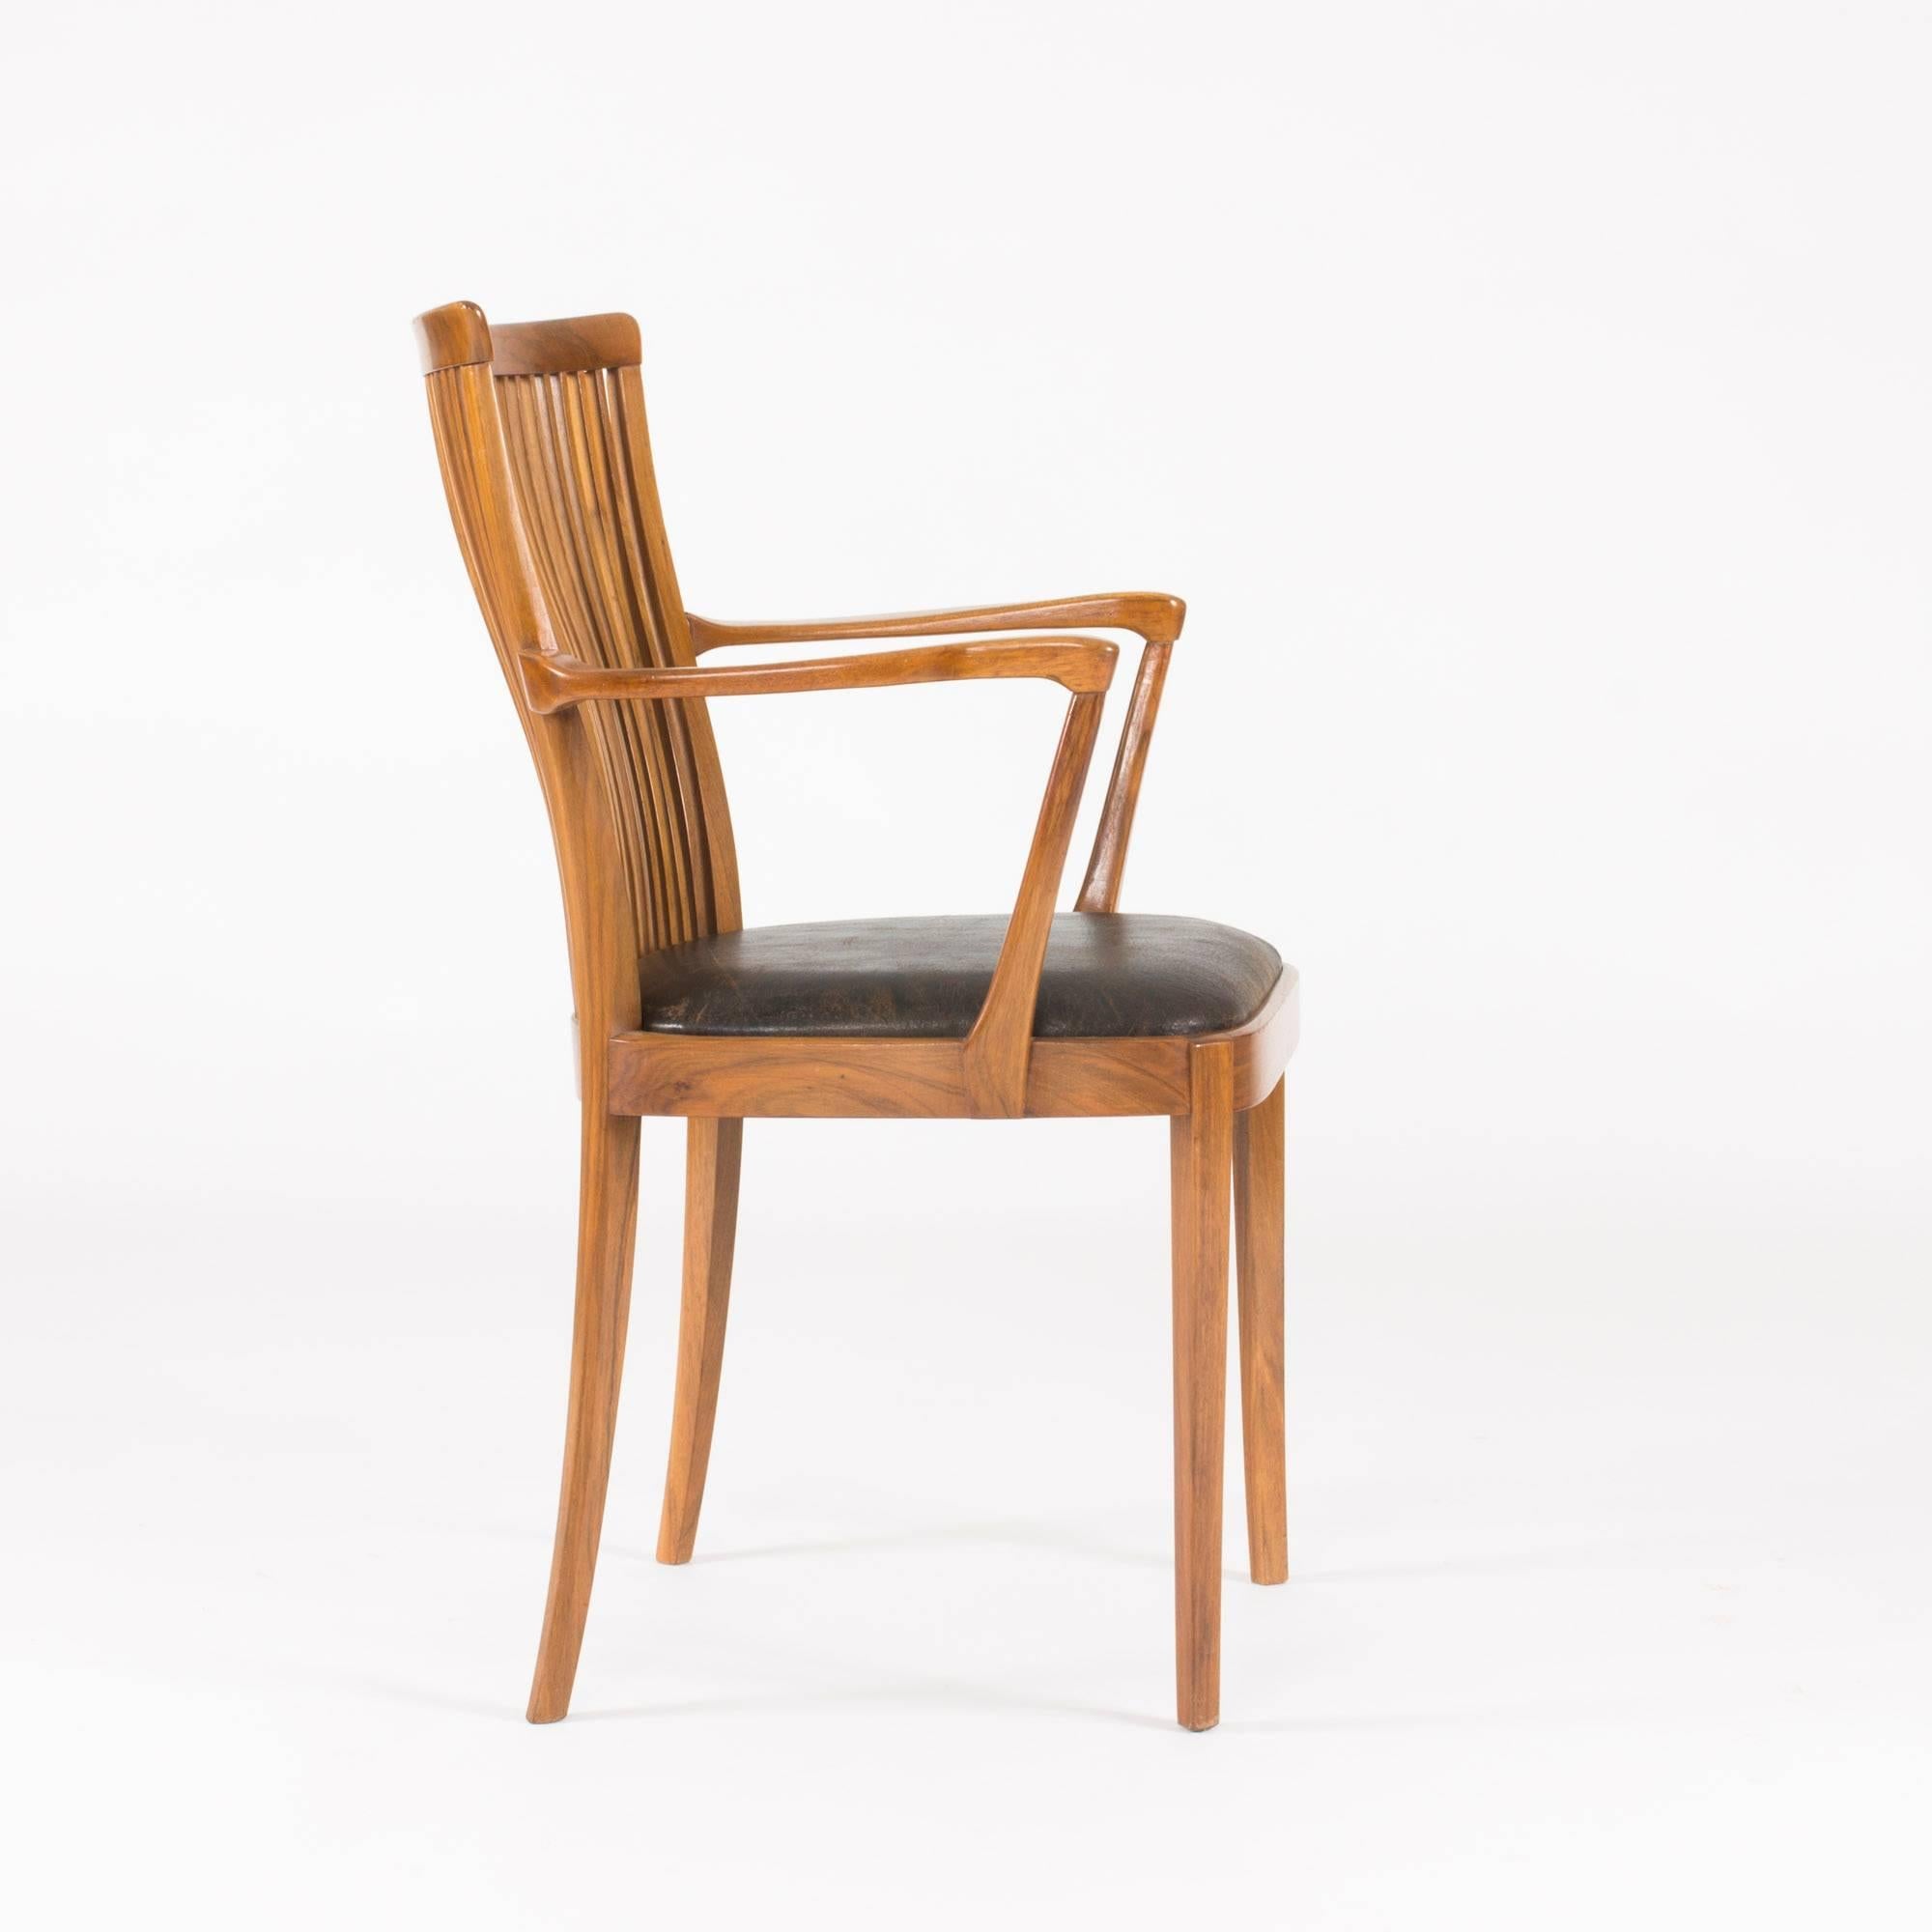 Luxurious armchair by Carl-Axel Acking, beautifully executed by master carpenter Hjalmar Jackson. Made from walnut with a brown leather seat. Graceful, modernist design.

Carl-Axel Acking was a Swedish architect, furniture designer and professor